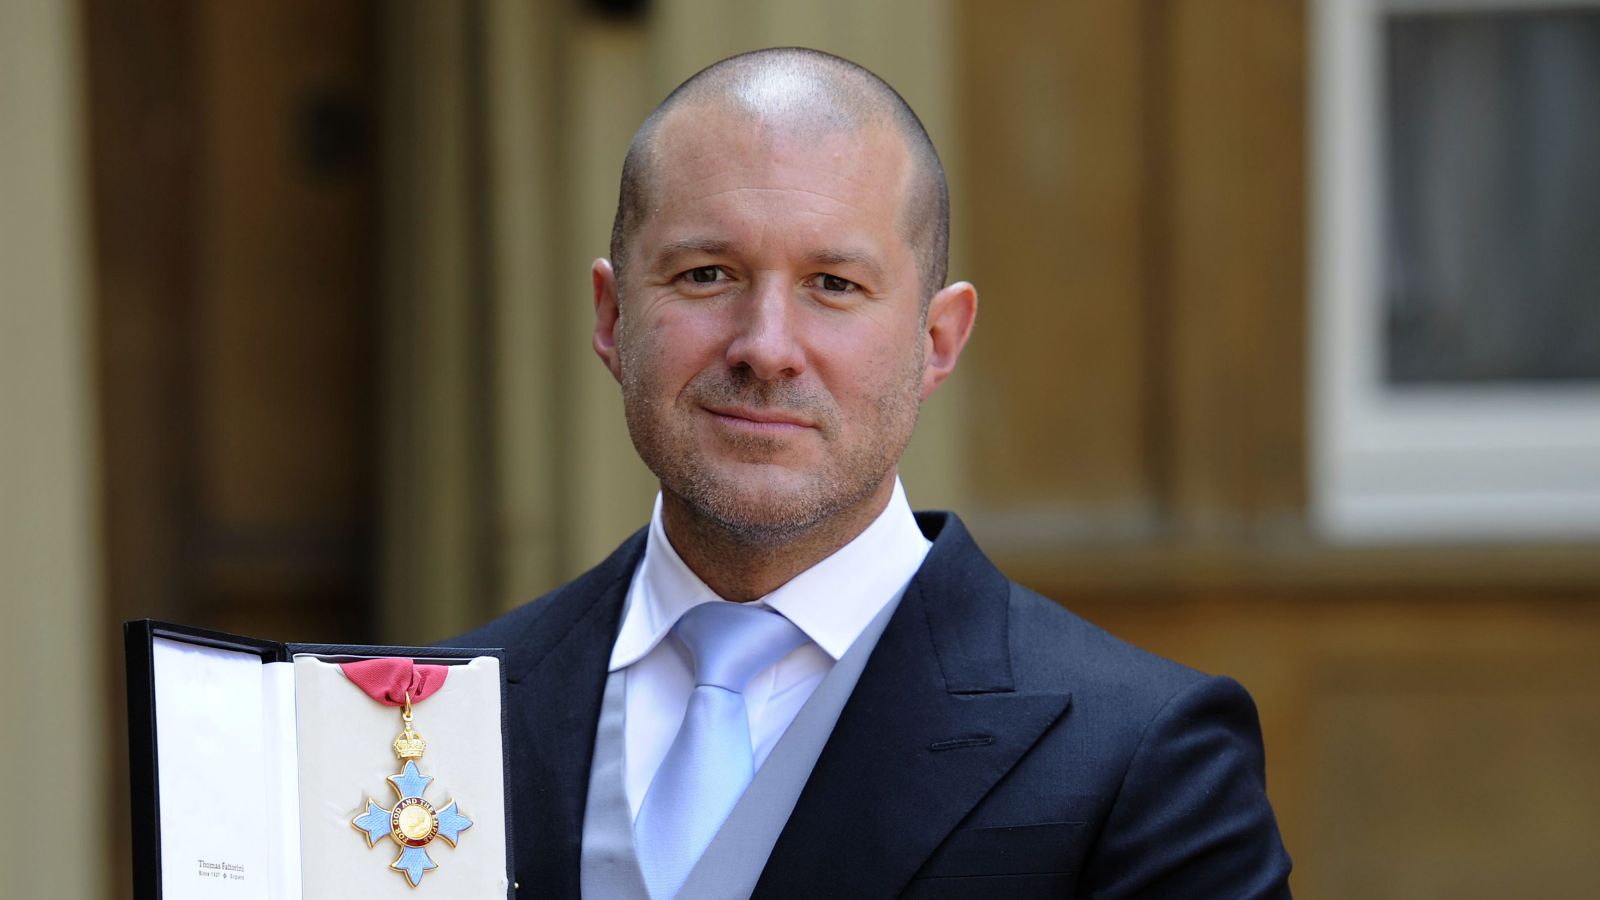 Sir Jony Ive accepting a medal for Royal Chancellor.